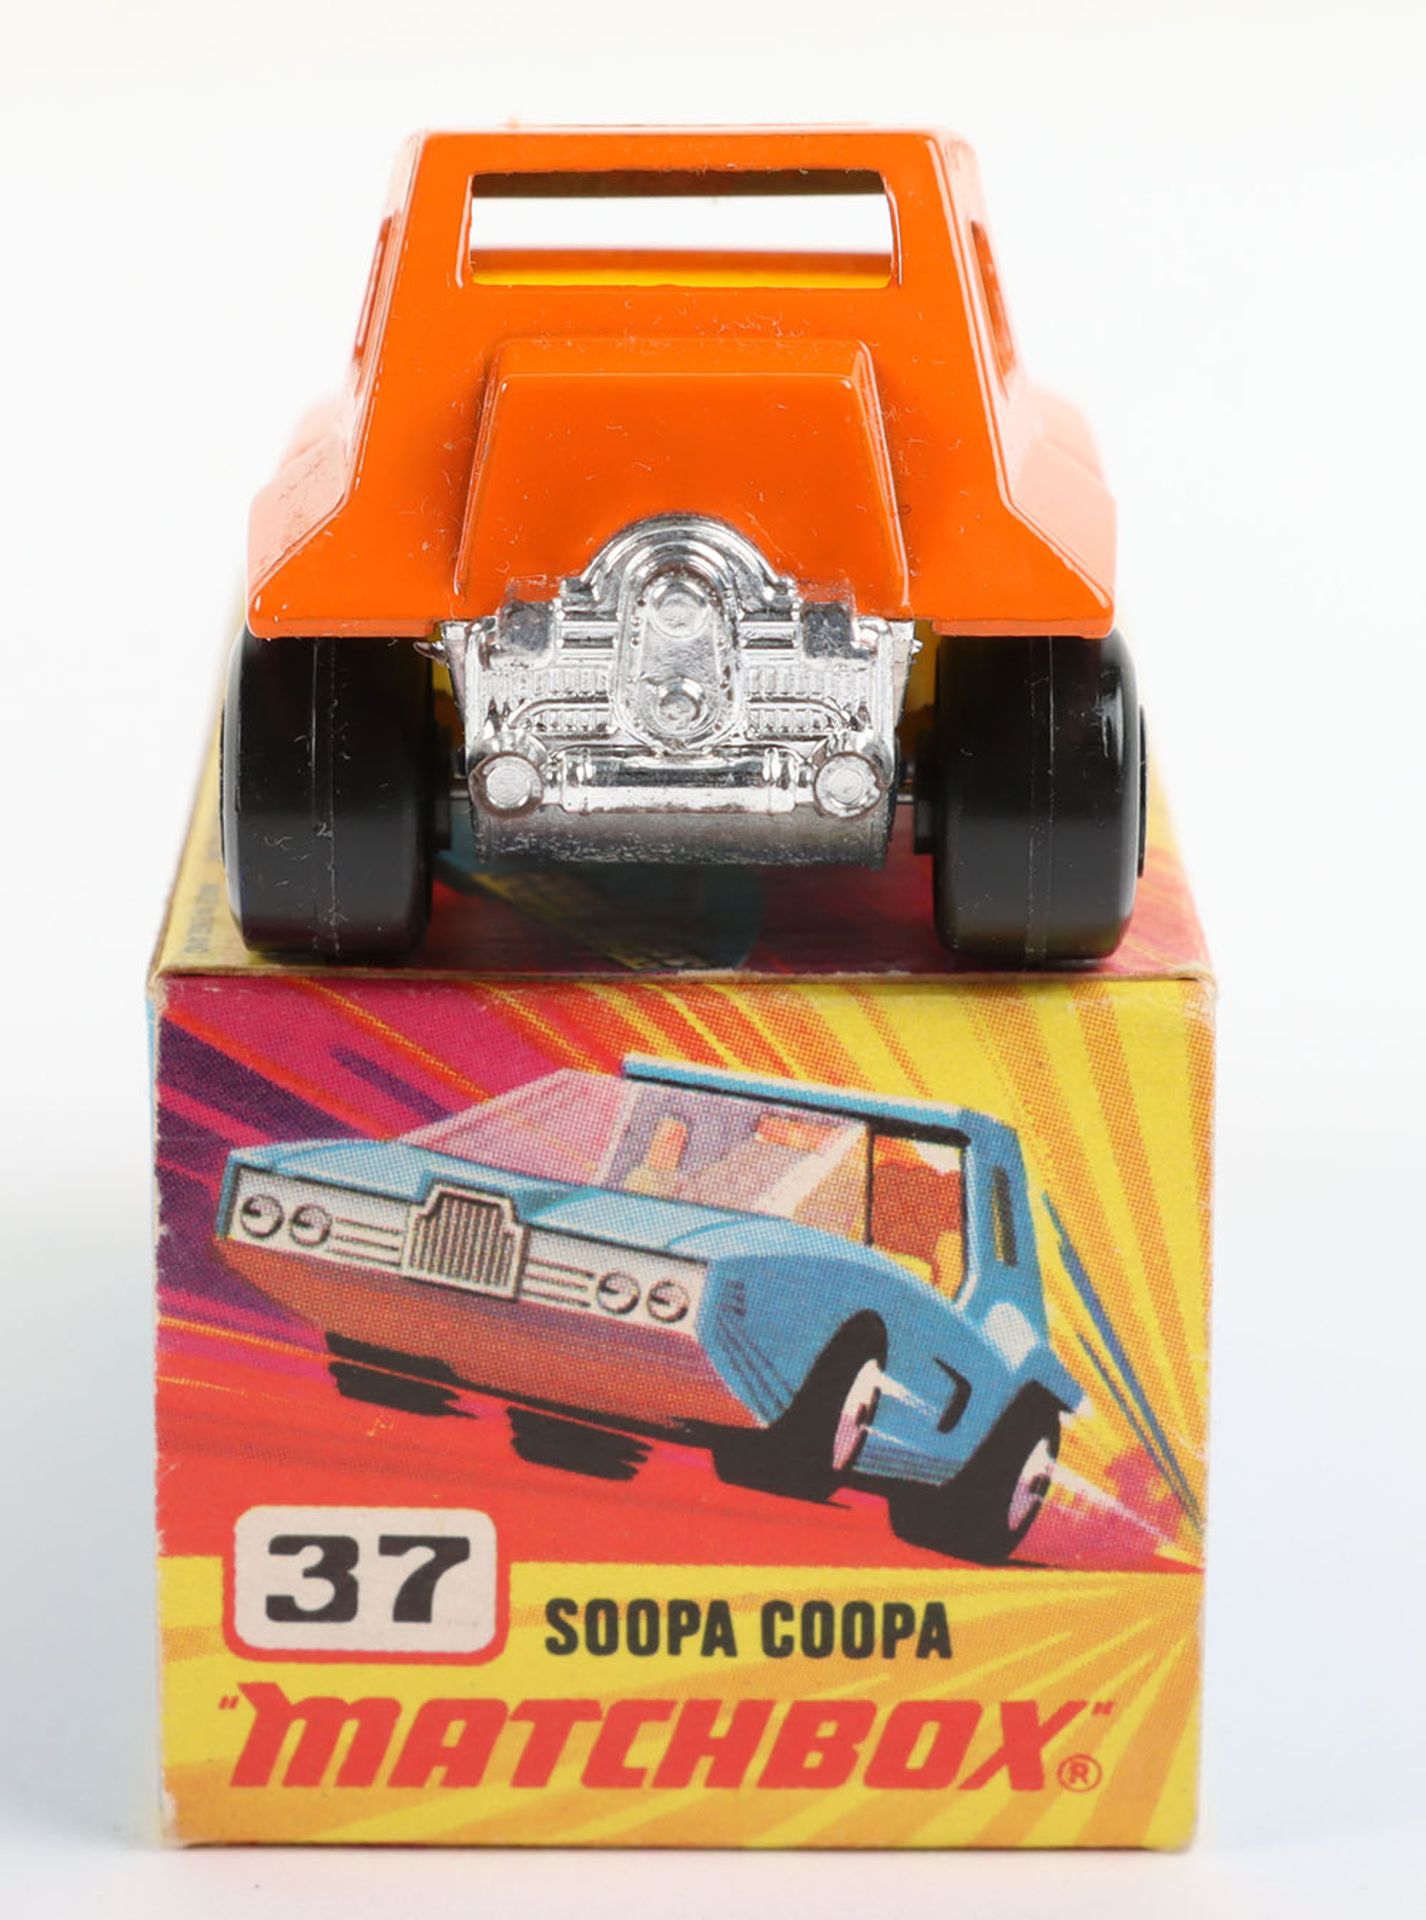 Matchbox Lesney Superfast 37d Soopa Coopa Jaffa Mobile Promotional Model - Image 3 of 5